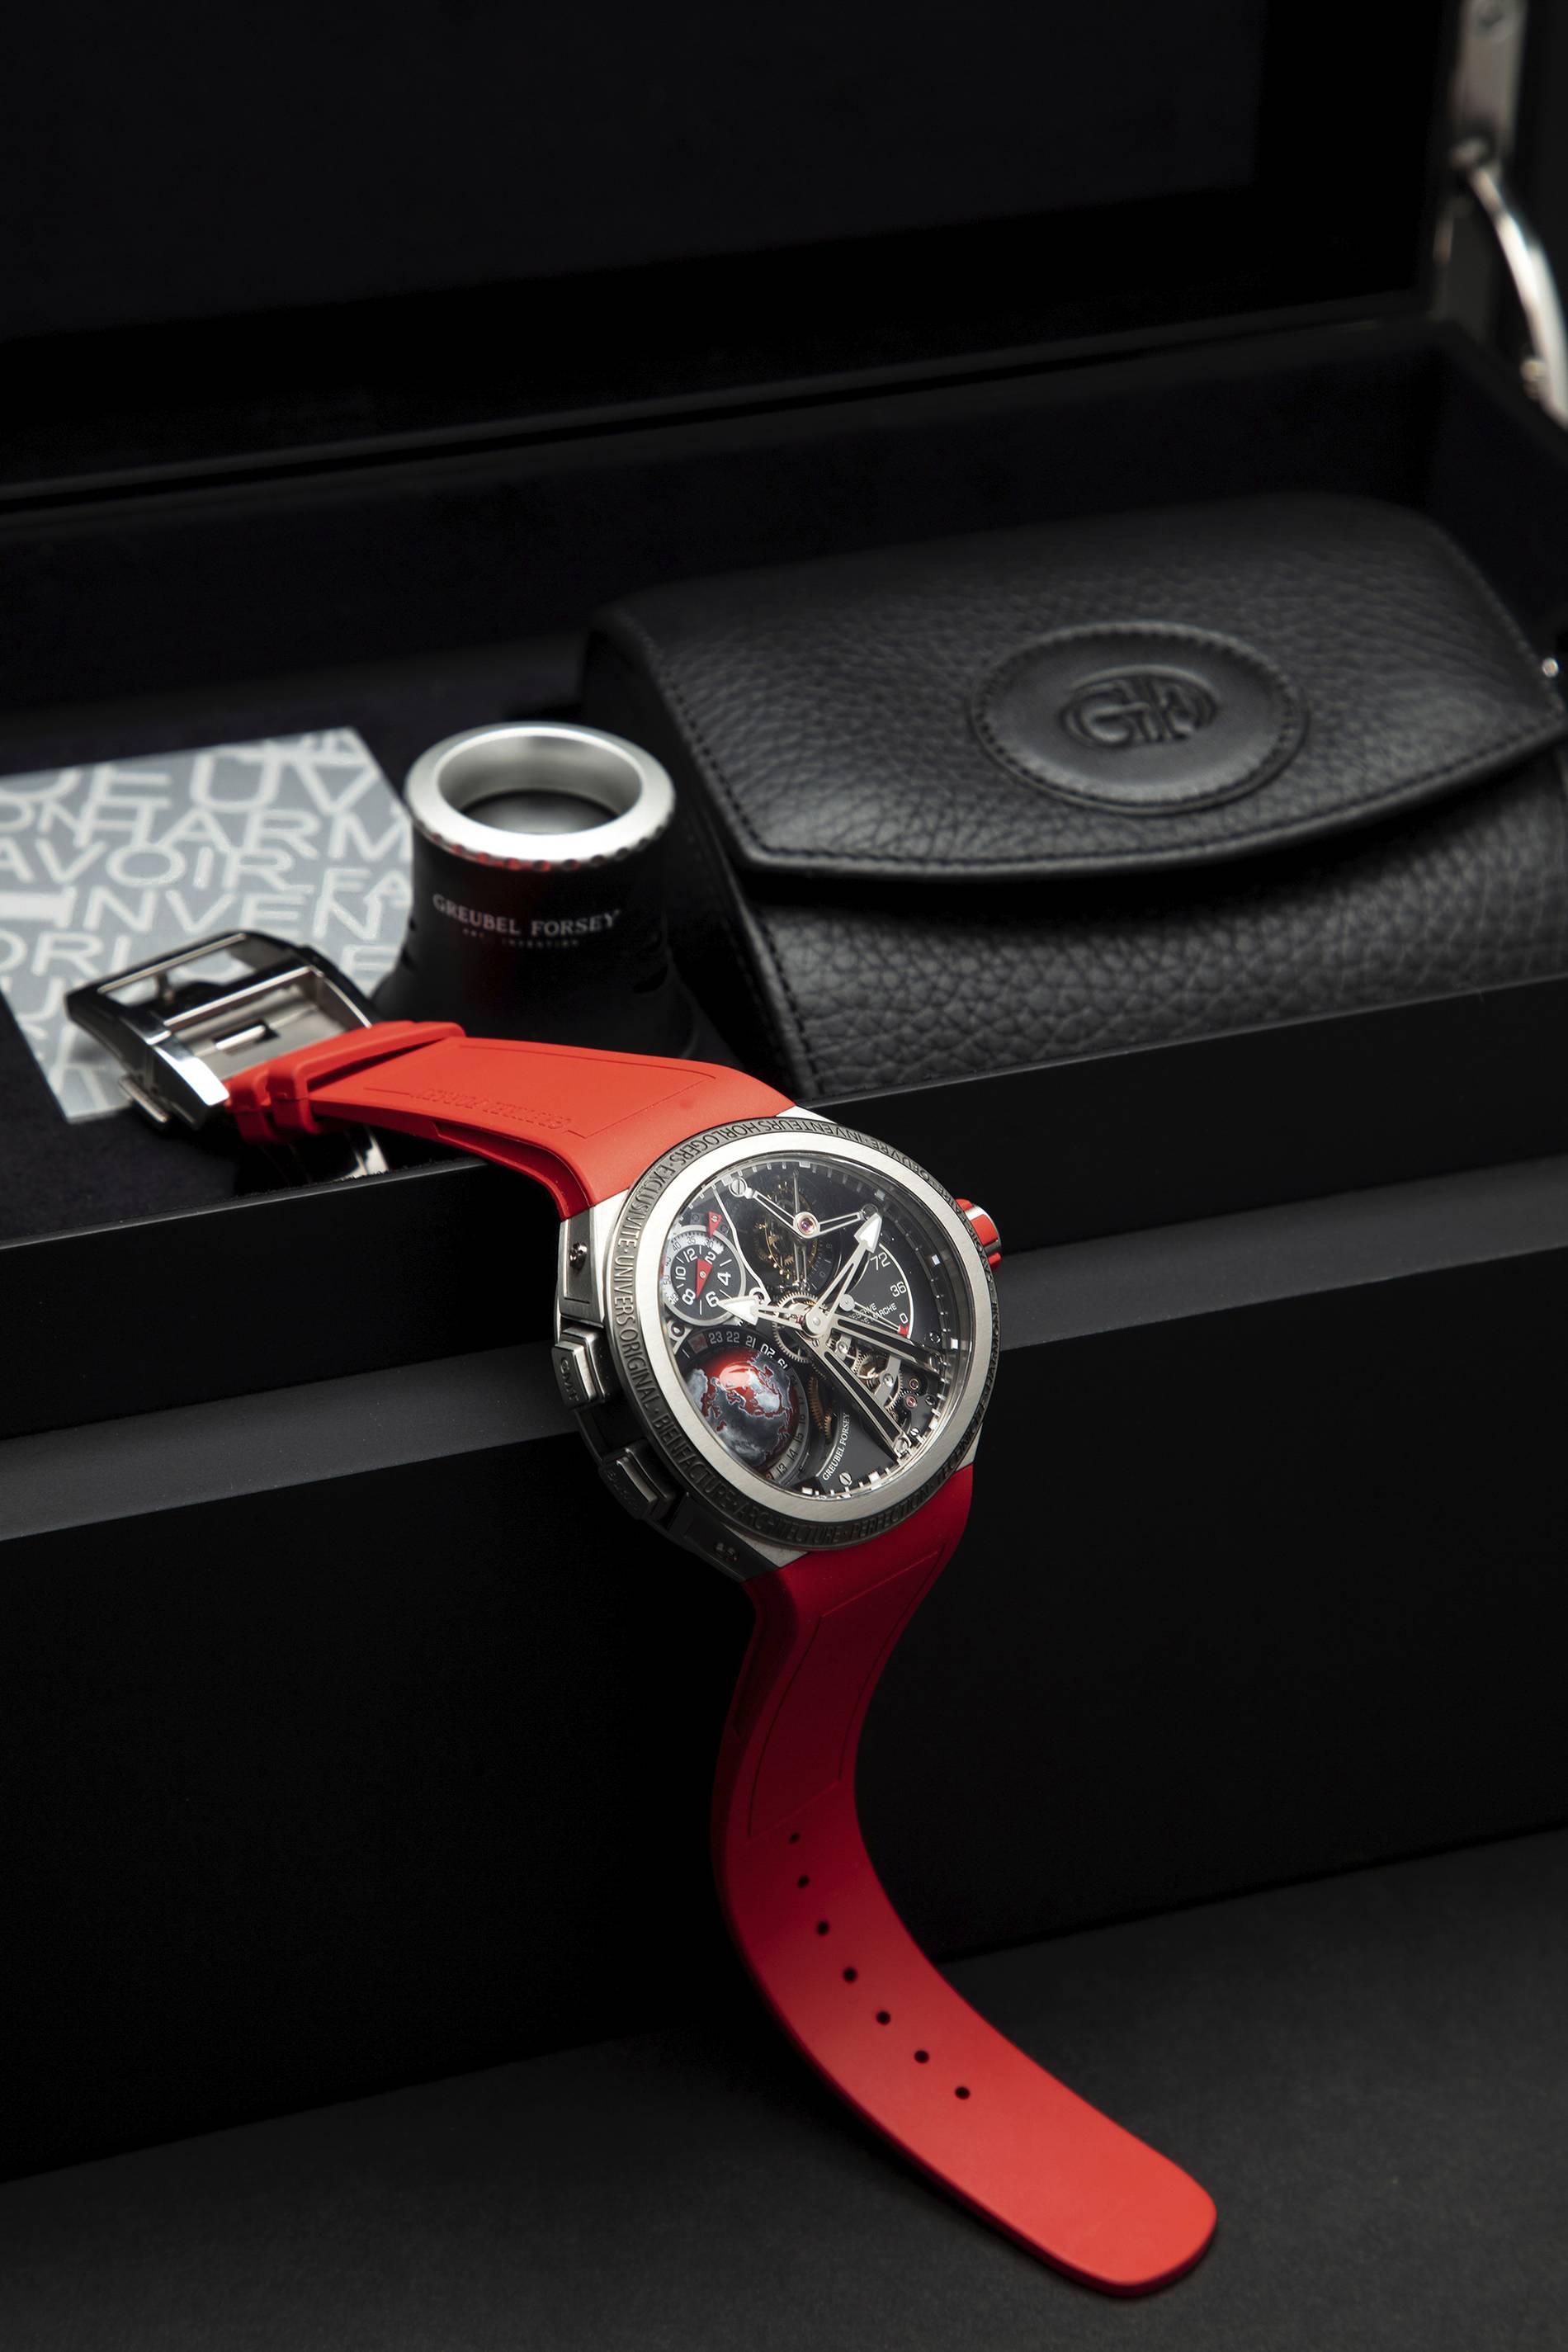 Greubel Forsey GMT Sports watch in red